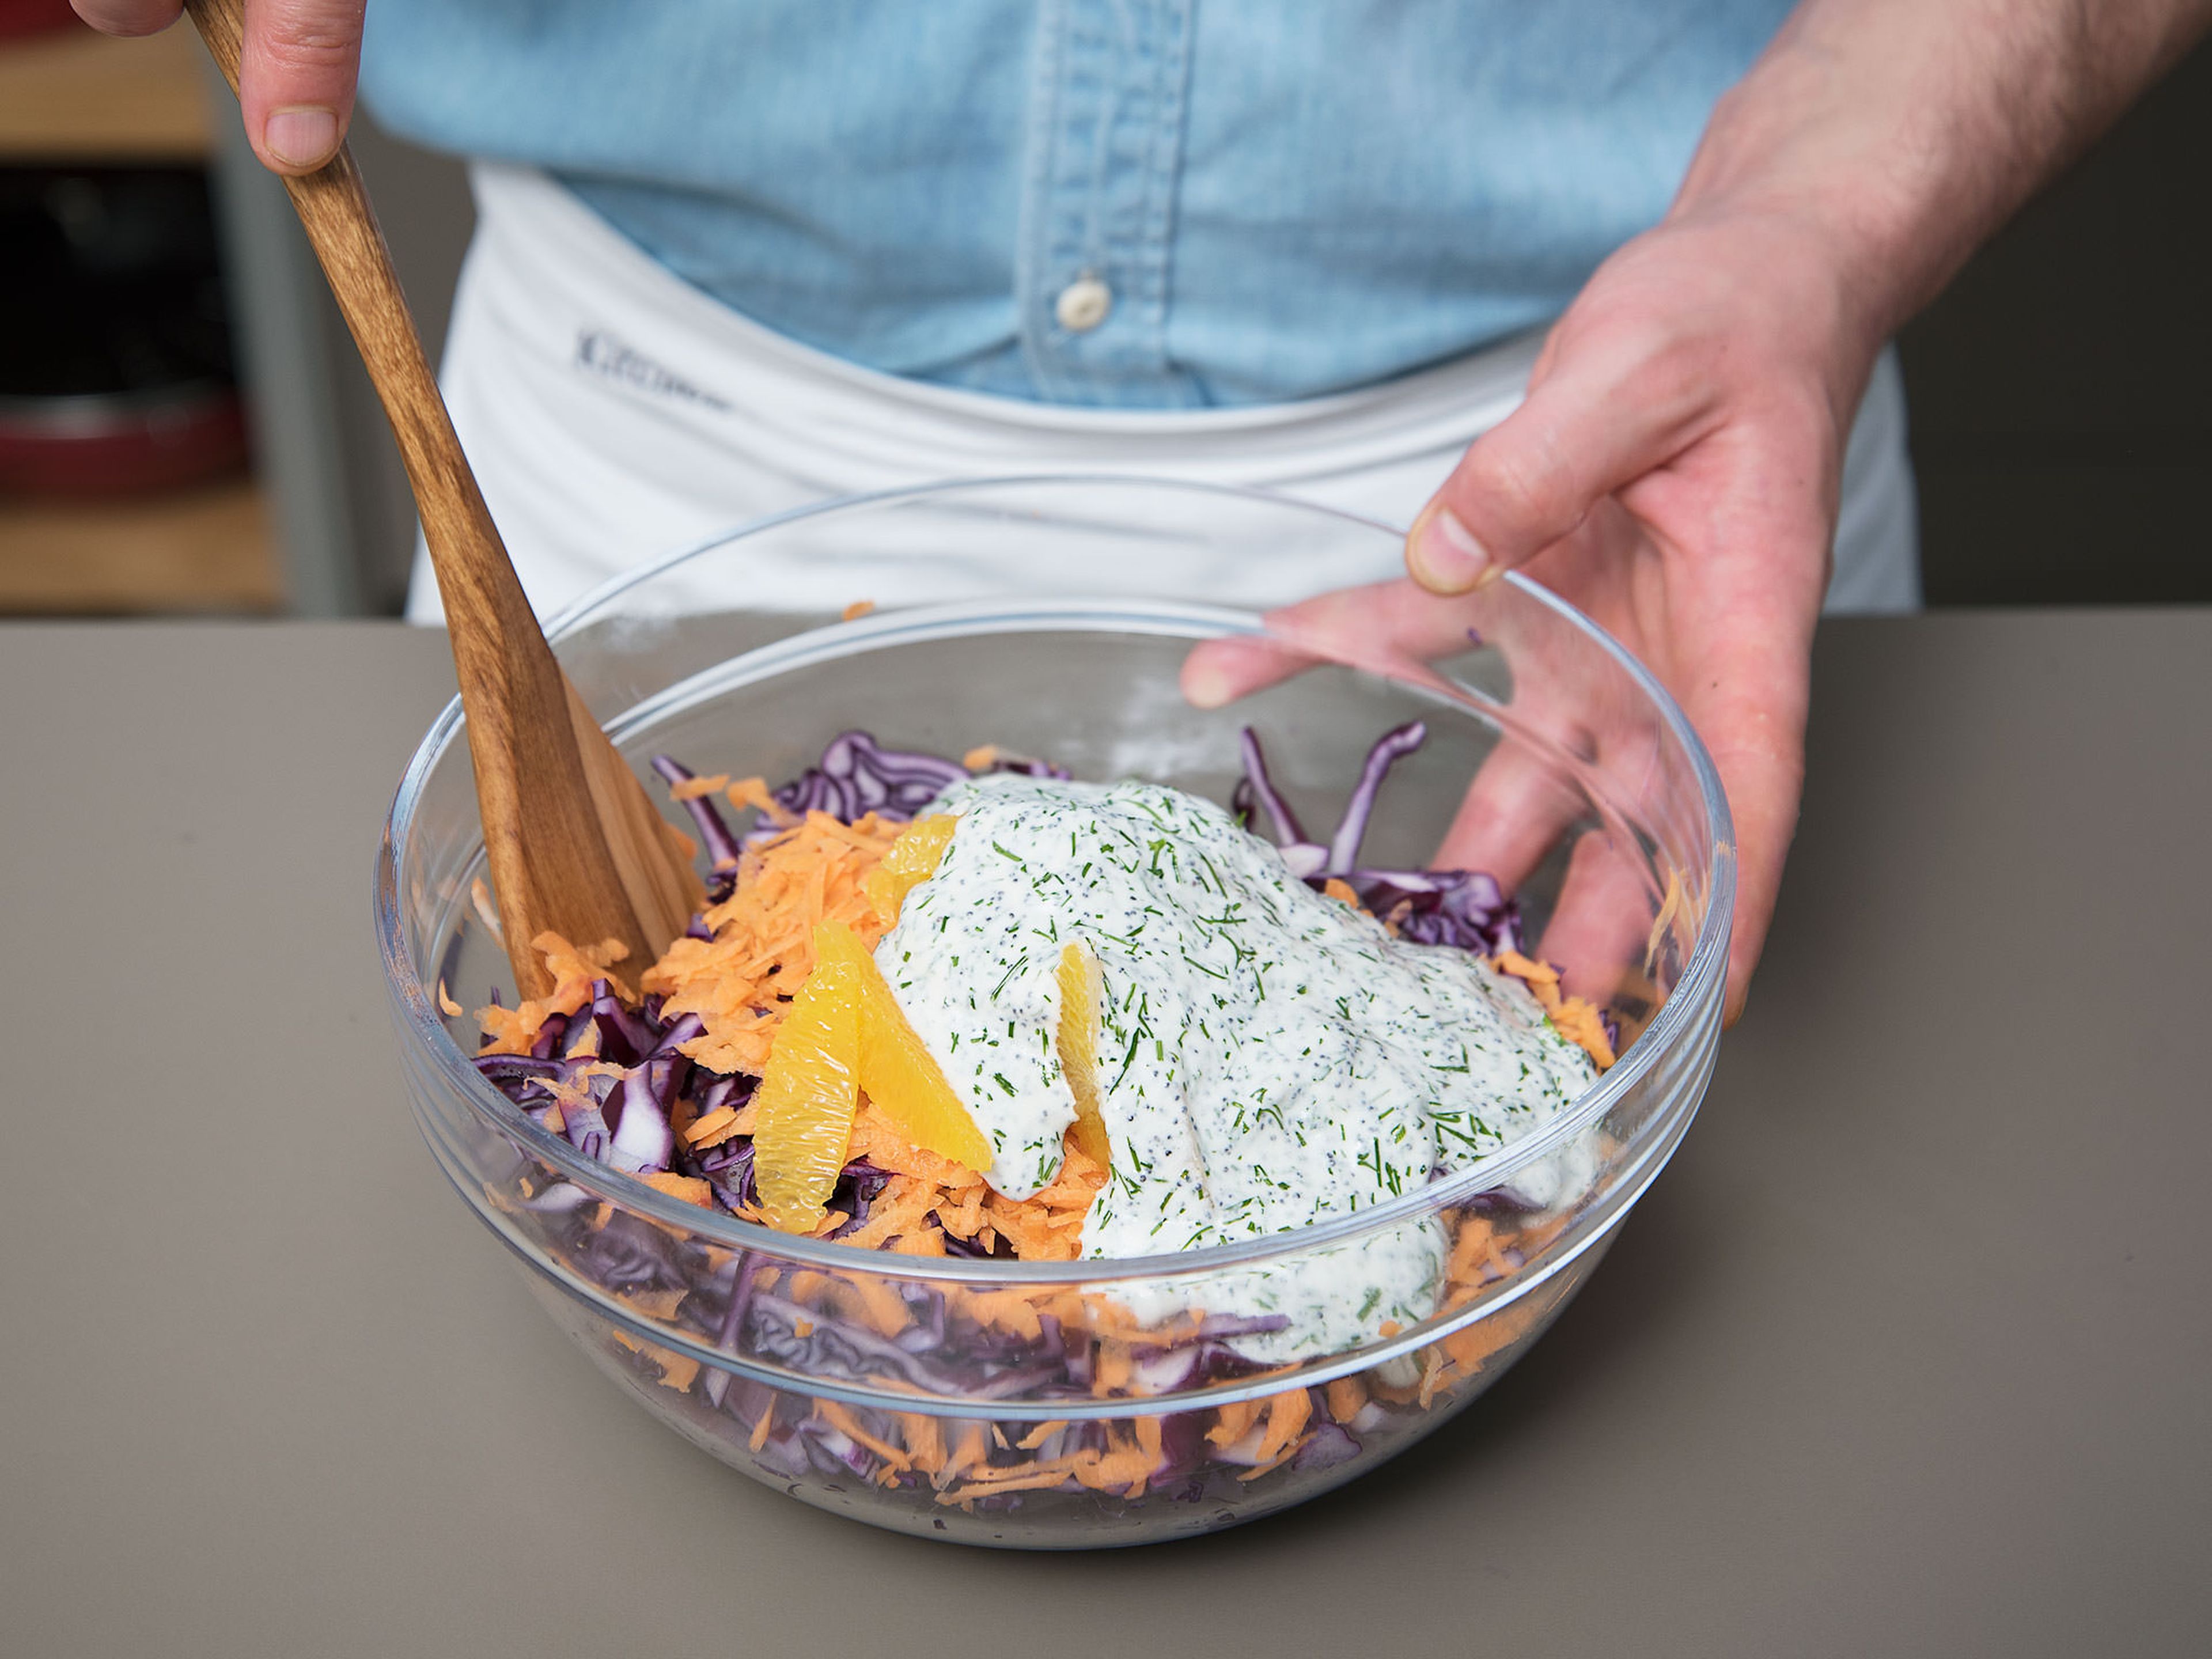 Pour dressing over the salad, stir to combine, and let set for approx. 30 min. Enjoy!